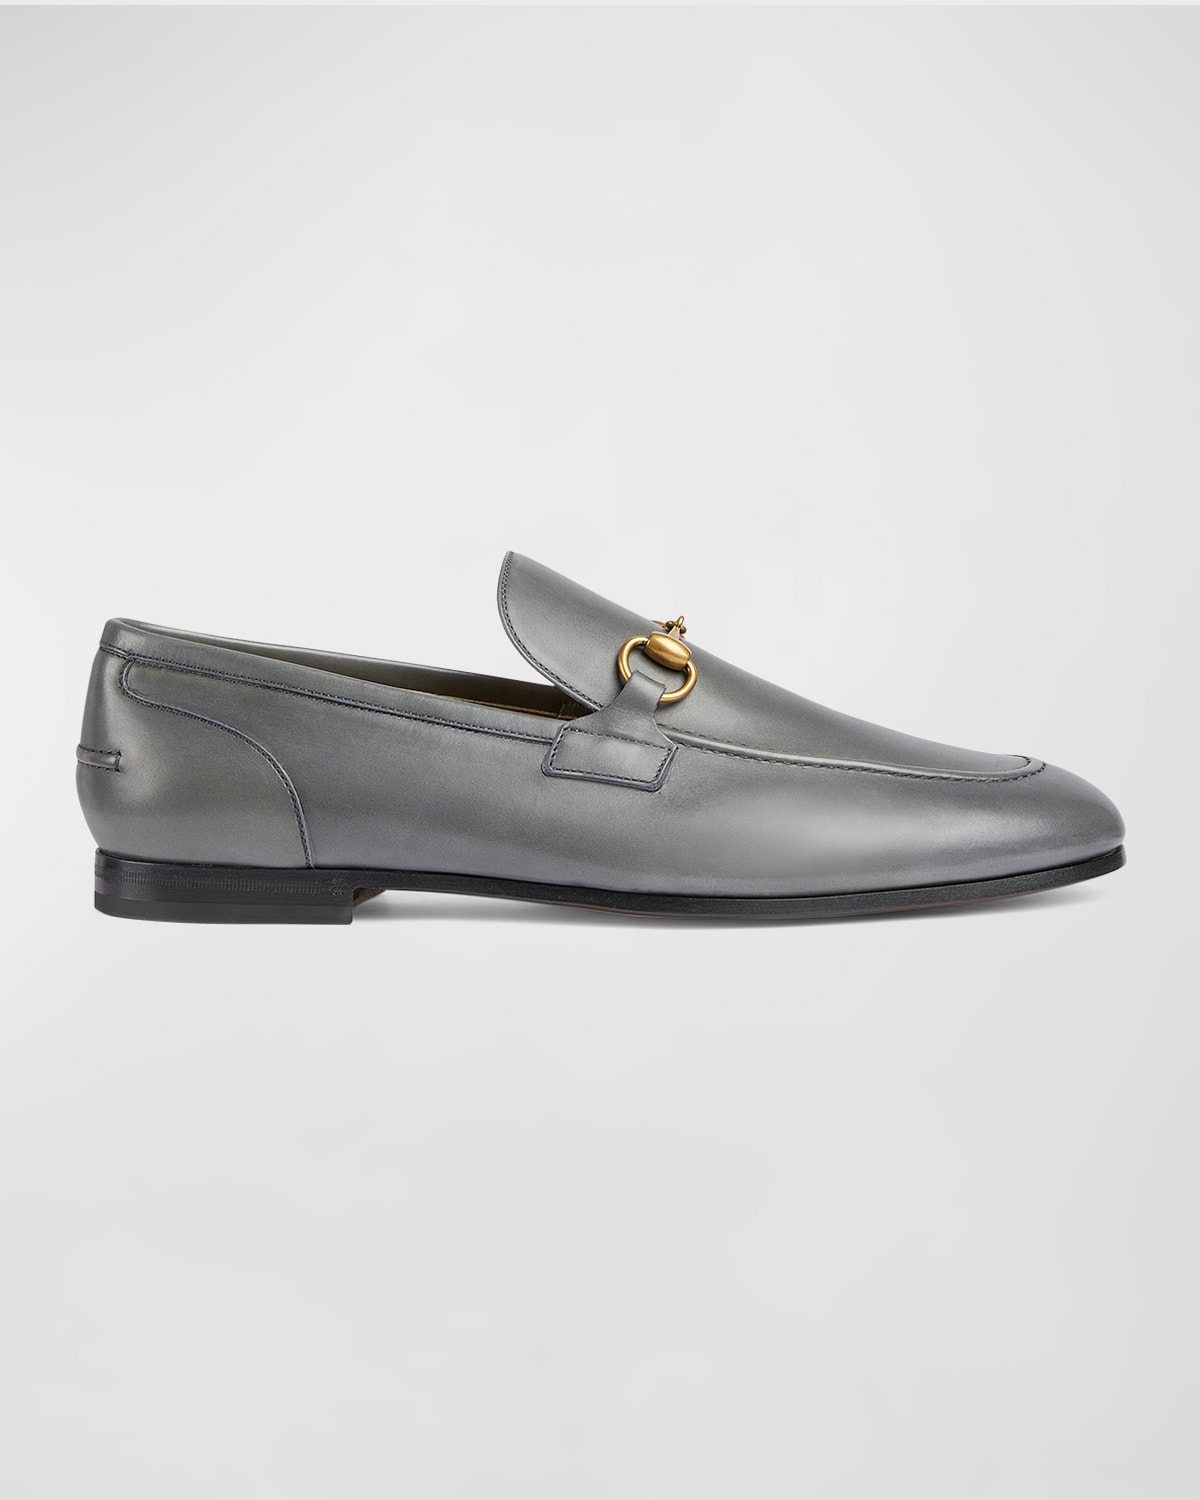 Gucci Men's Jordaan Leather Loafers In Graphite Grey